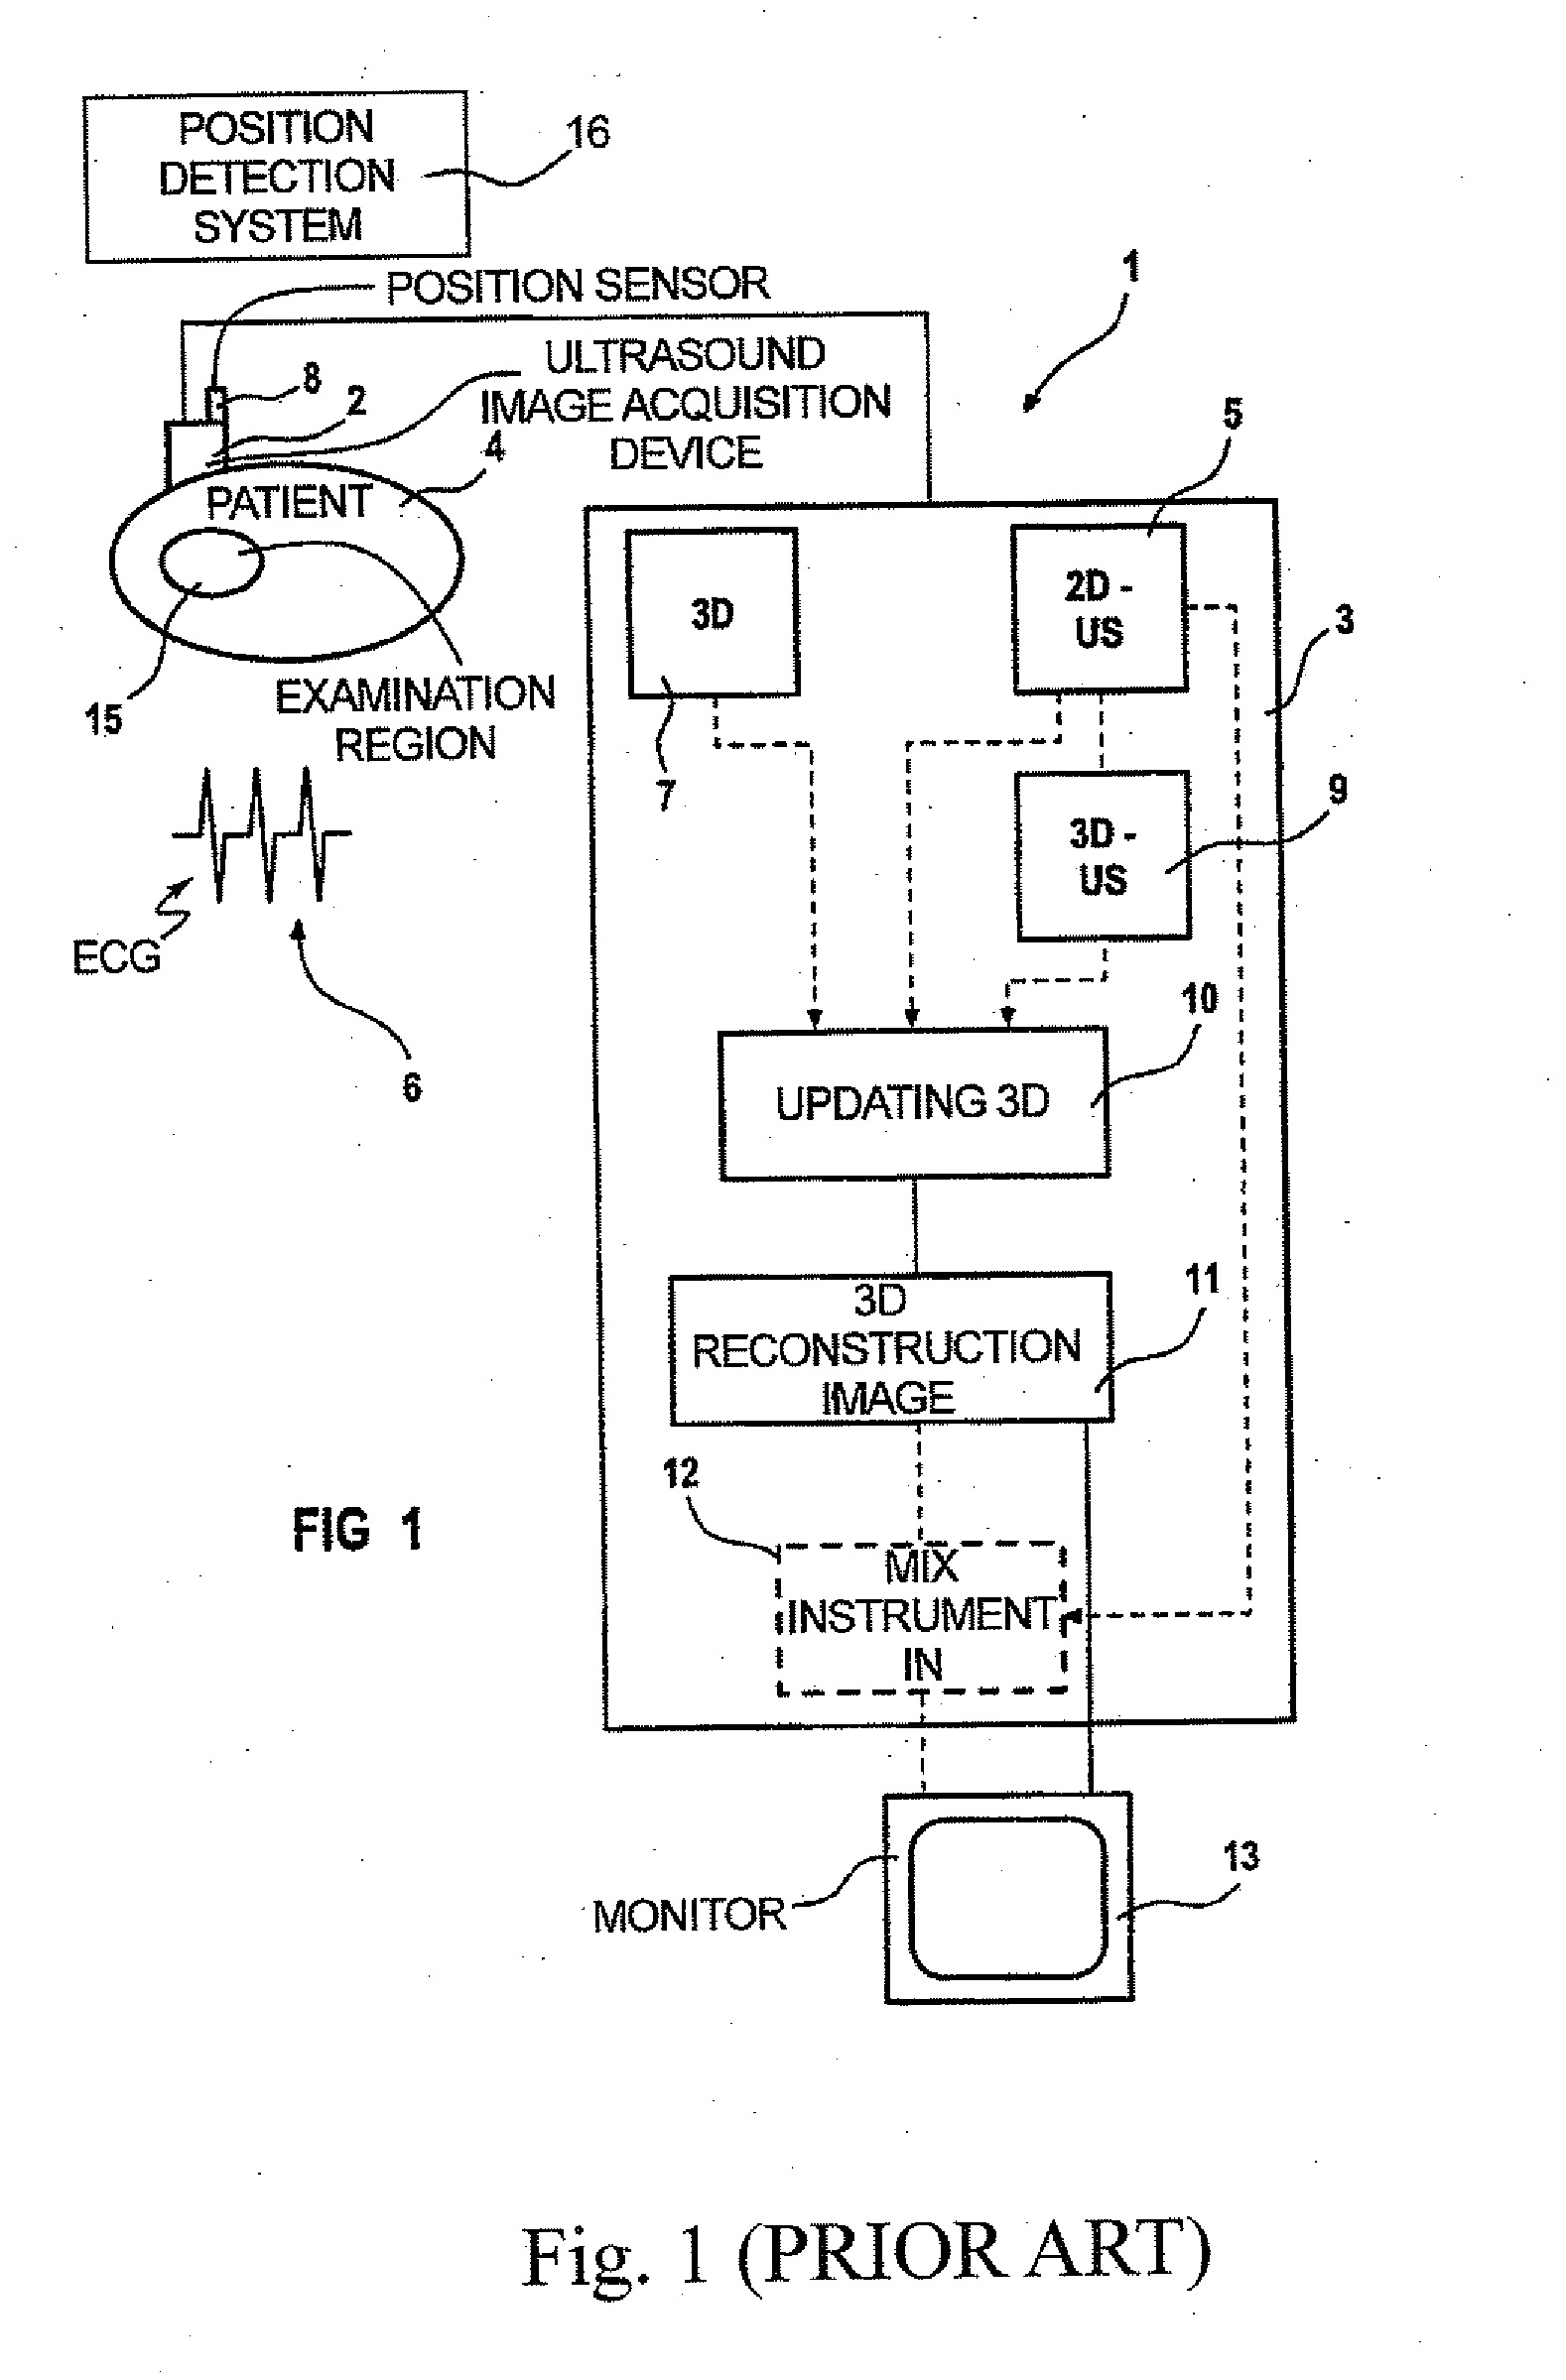 Apparatus and method for providing a dynamic 3D ultrasound image